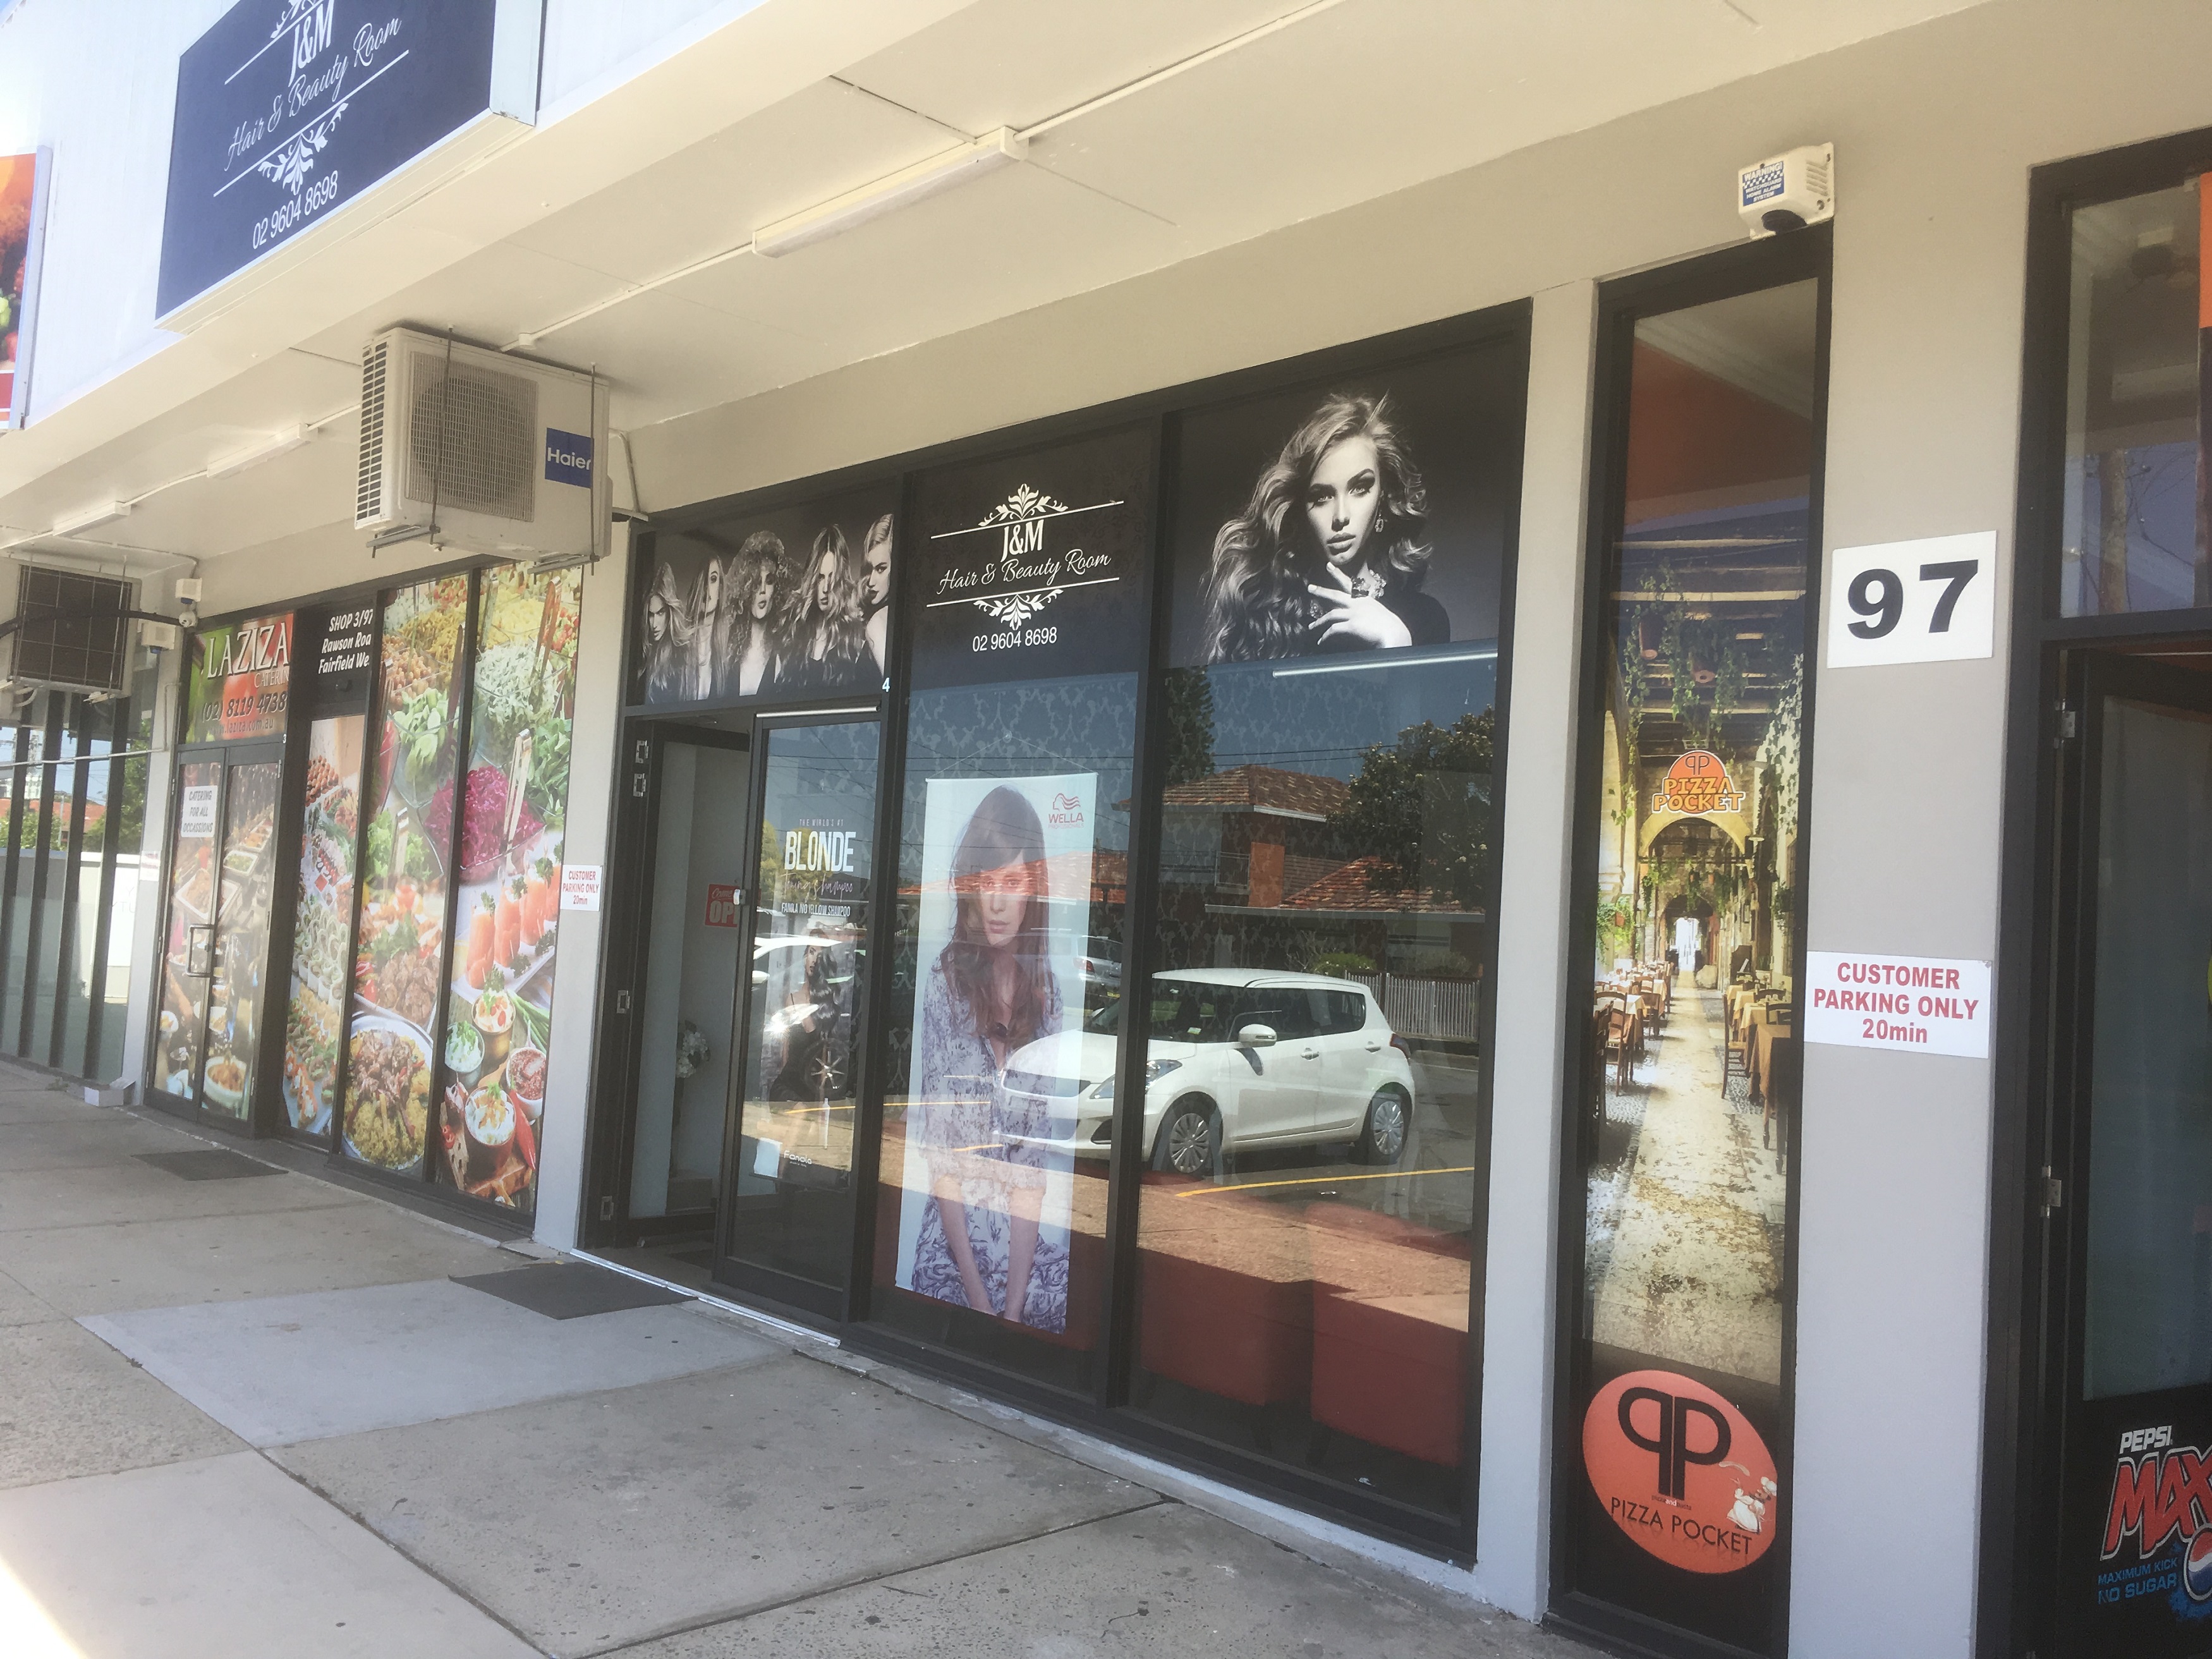 Retail property for lease in fairfield west 1